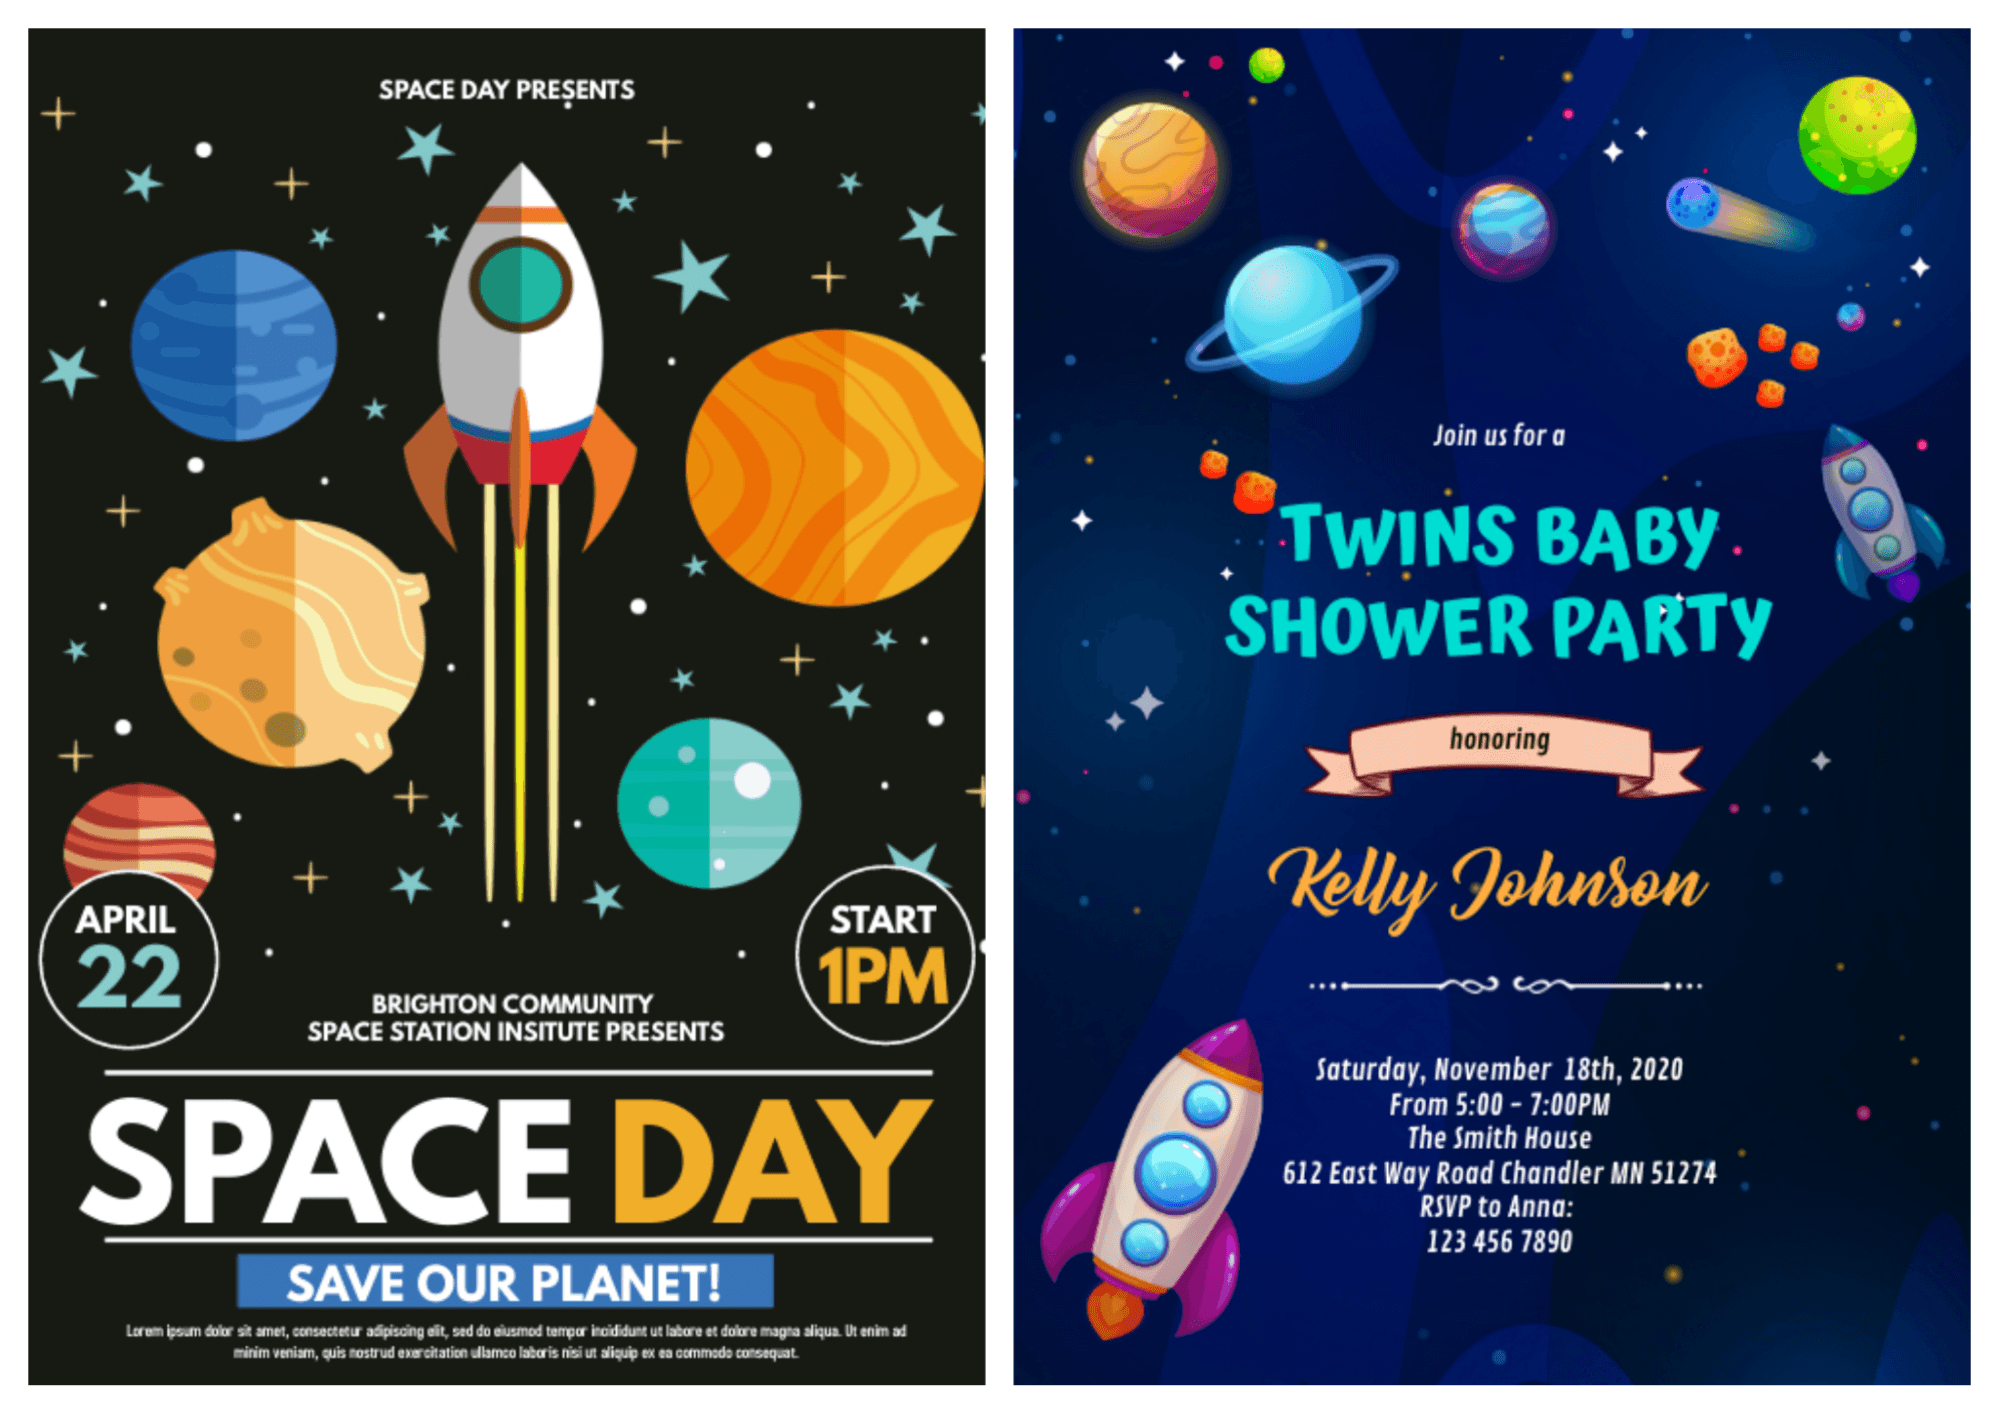 Two flyers designed with an outer space theme.